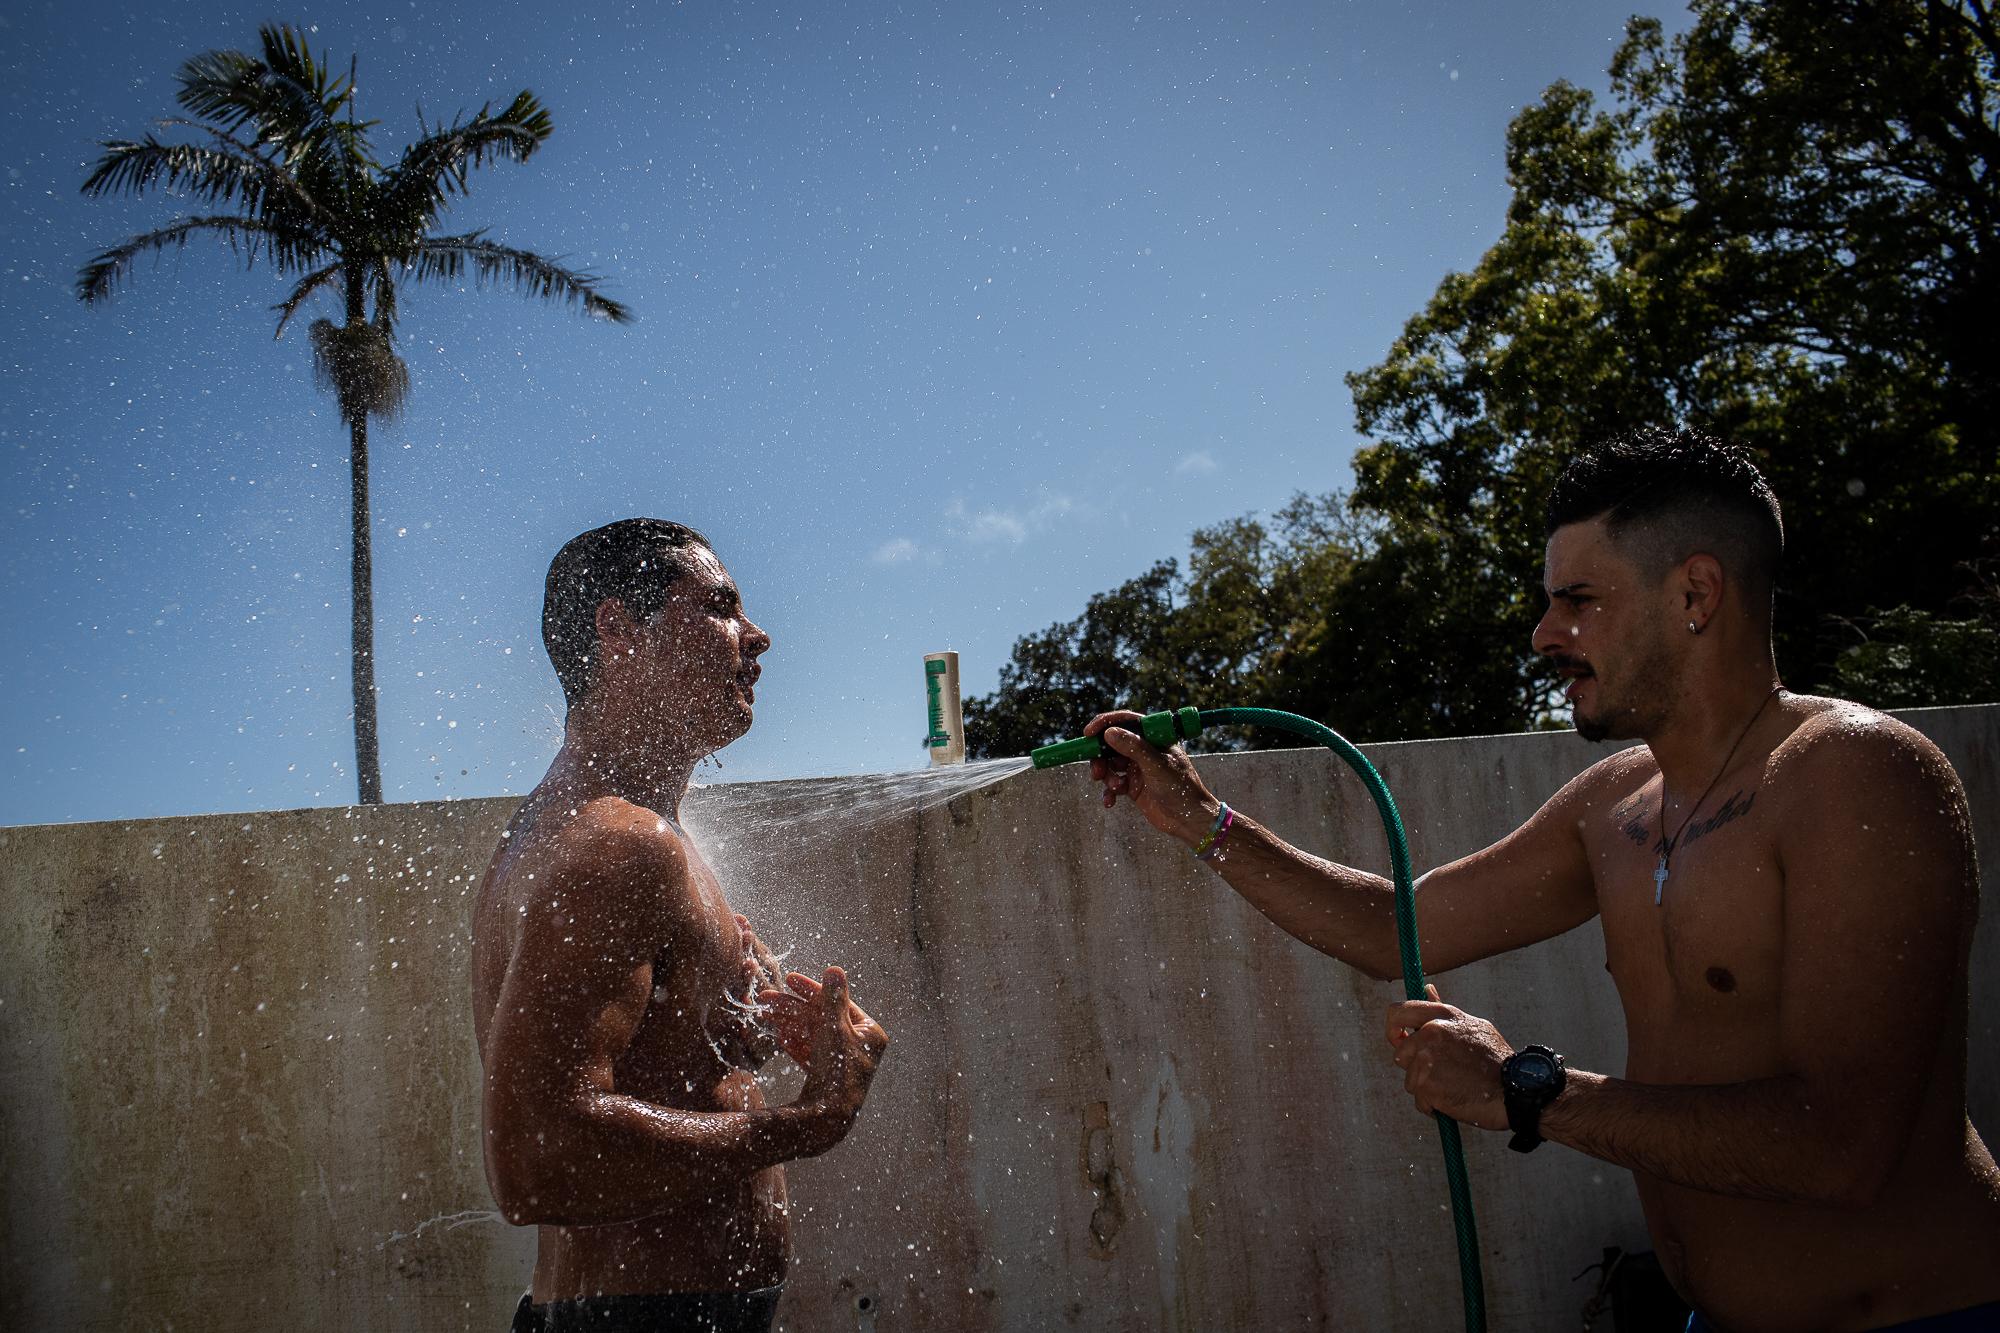 F&aacute;bio Medeiros gets hosed by a friend after exercising in the backyard of the shelter...